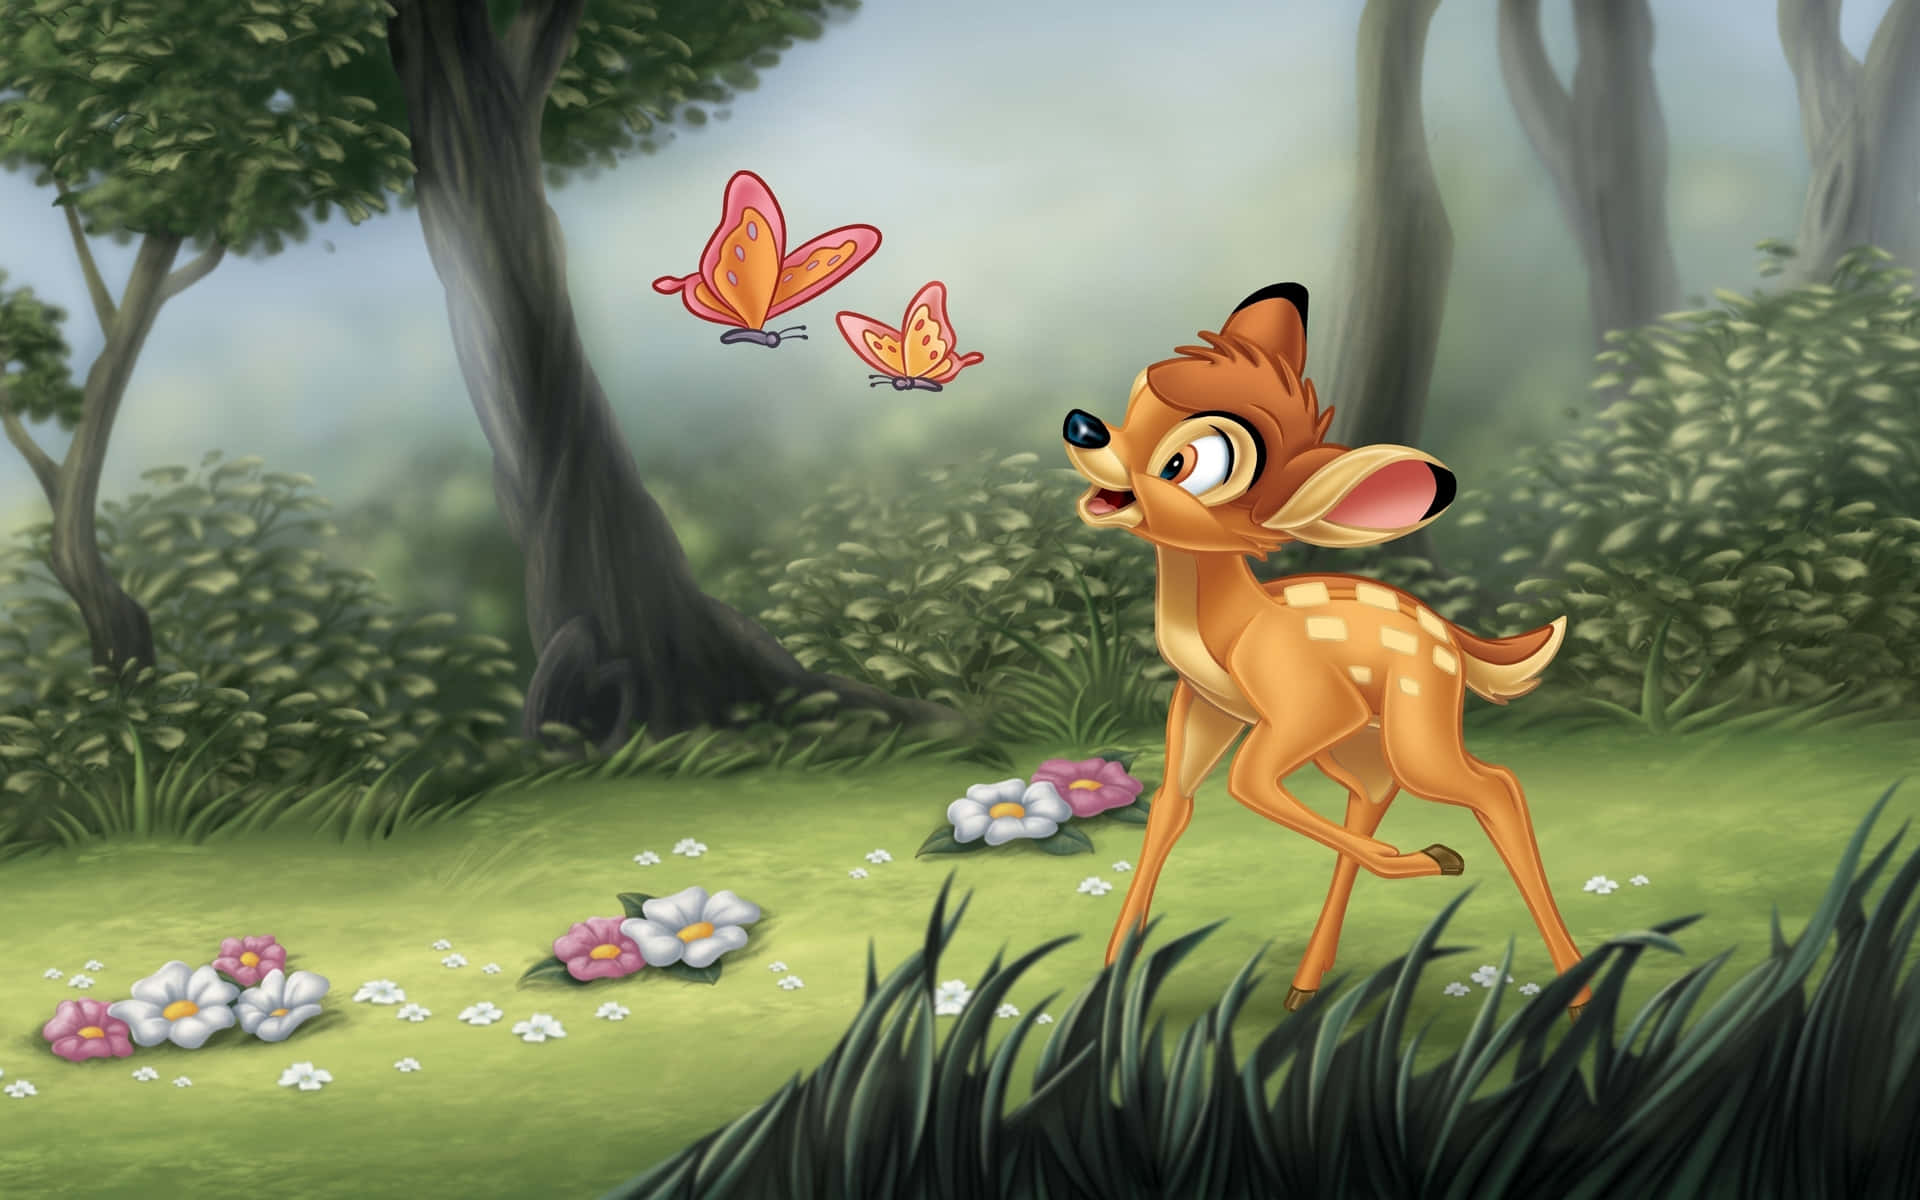 Enter a World of Enchantment with Bambi